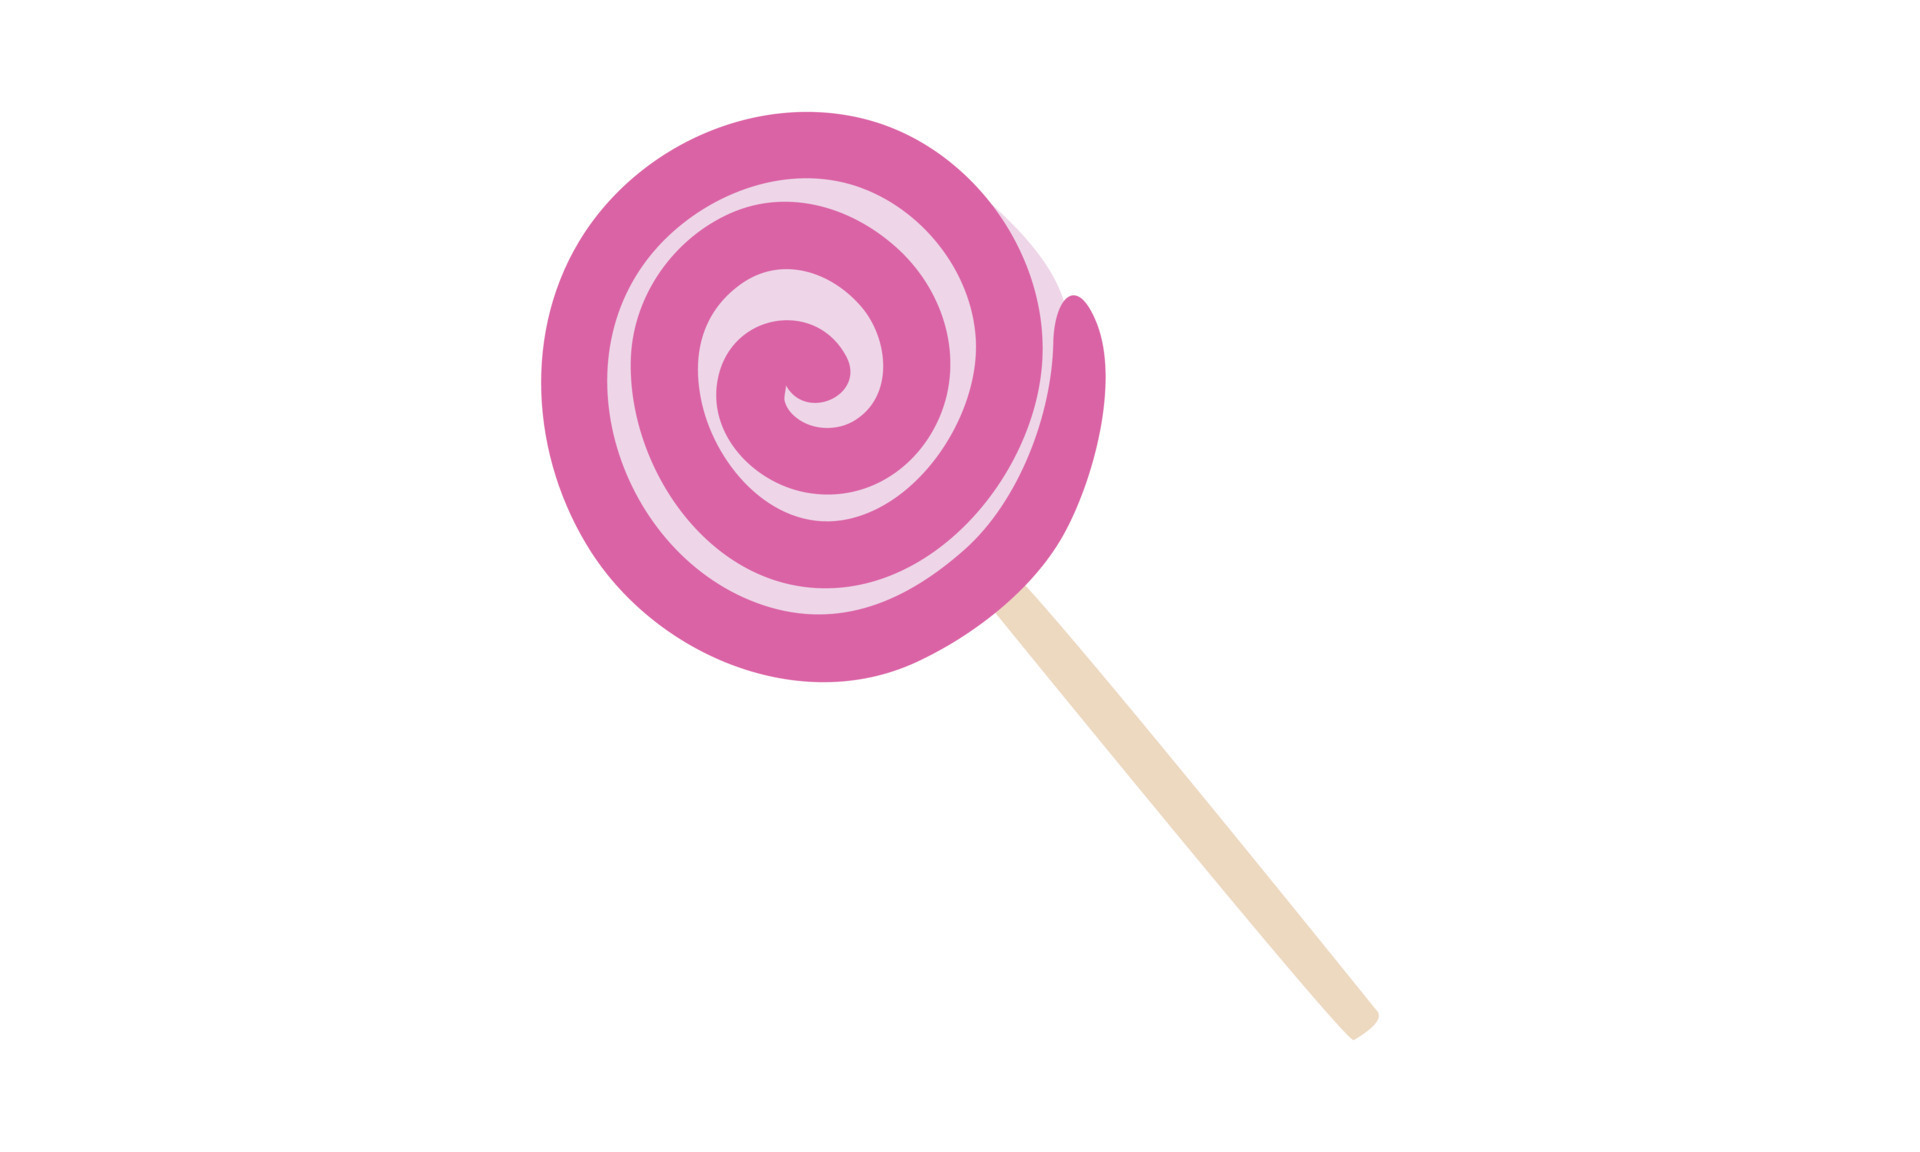 Sweet swirl lollipop clipart. Simple cute round lolly candy on plastic  stick flat vector illustration isolated on white. Twisted hard sugar candy  cartoon style icon. Caramel suckers vector design 13740564 Vector Art